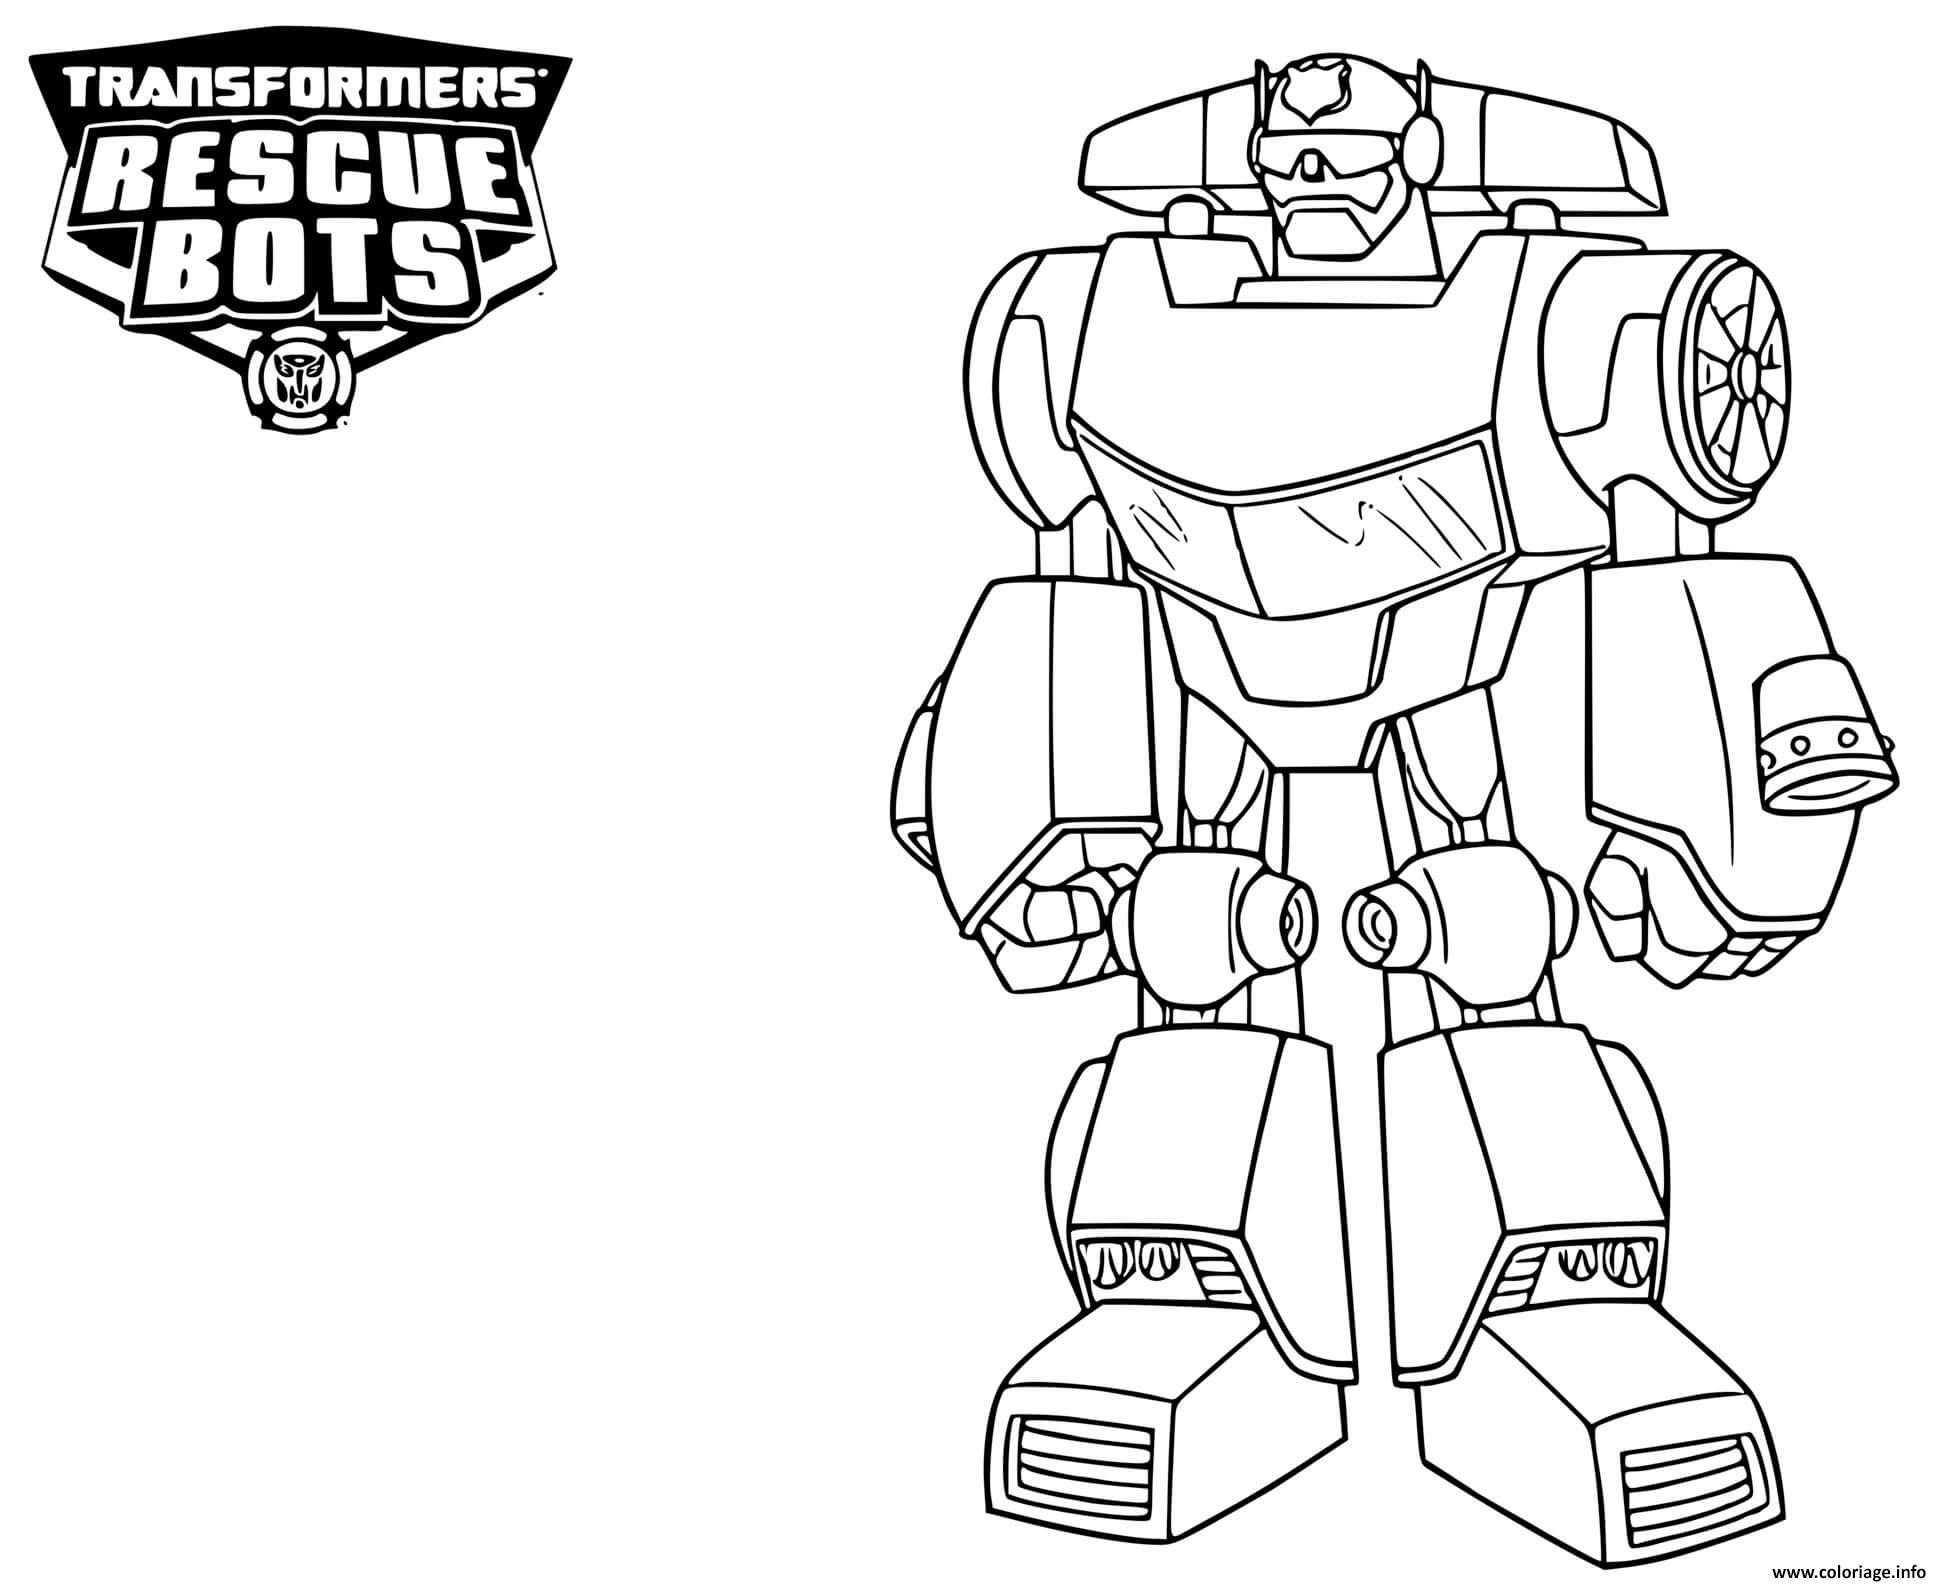 Coloriage Transformers Rescue Bots Chase Dessin Transformers À Imprimer avec Dessin Transformers